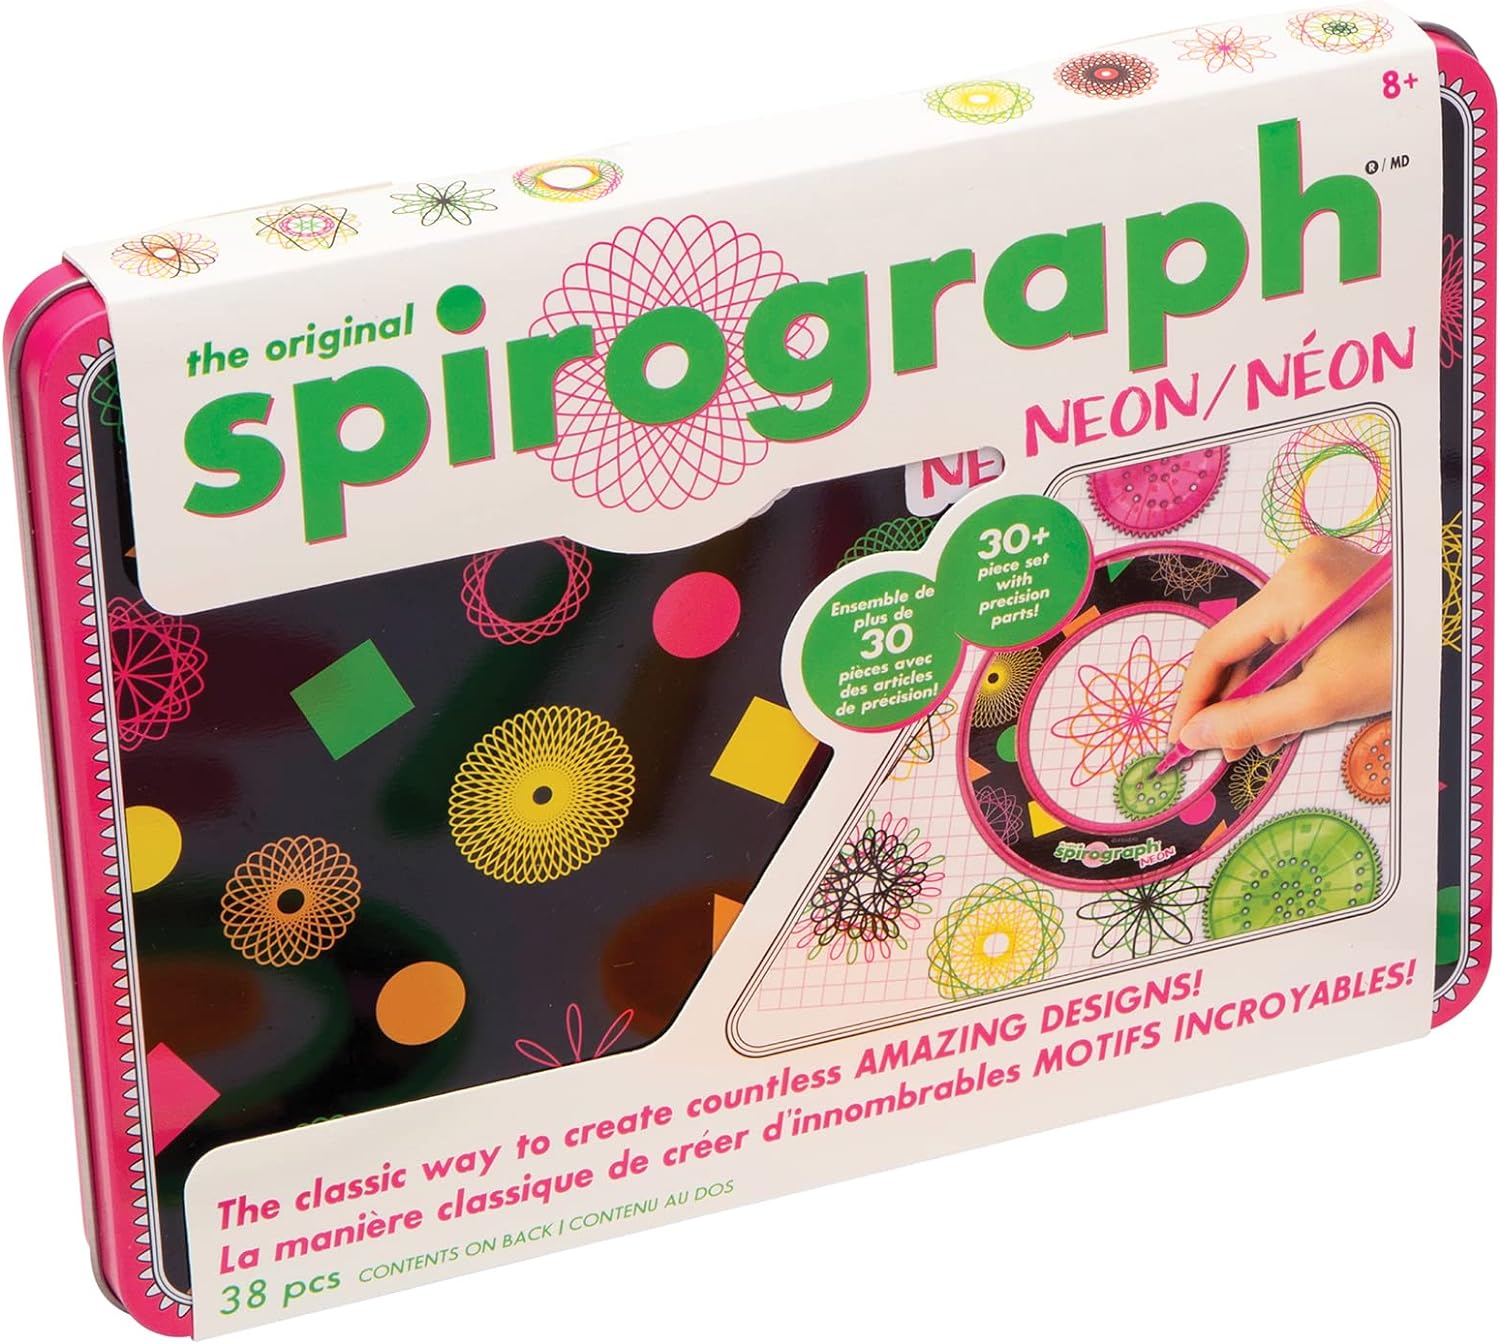 Spirograph Jr. — Jumbo Sized Gears — Arts and Craft Design Kit for Smaller  Hands — Ages 3+ & Design Set Tin - Classic Gear Design Kit in a Collectors  Tin - for Ages 8+ 